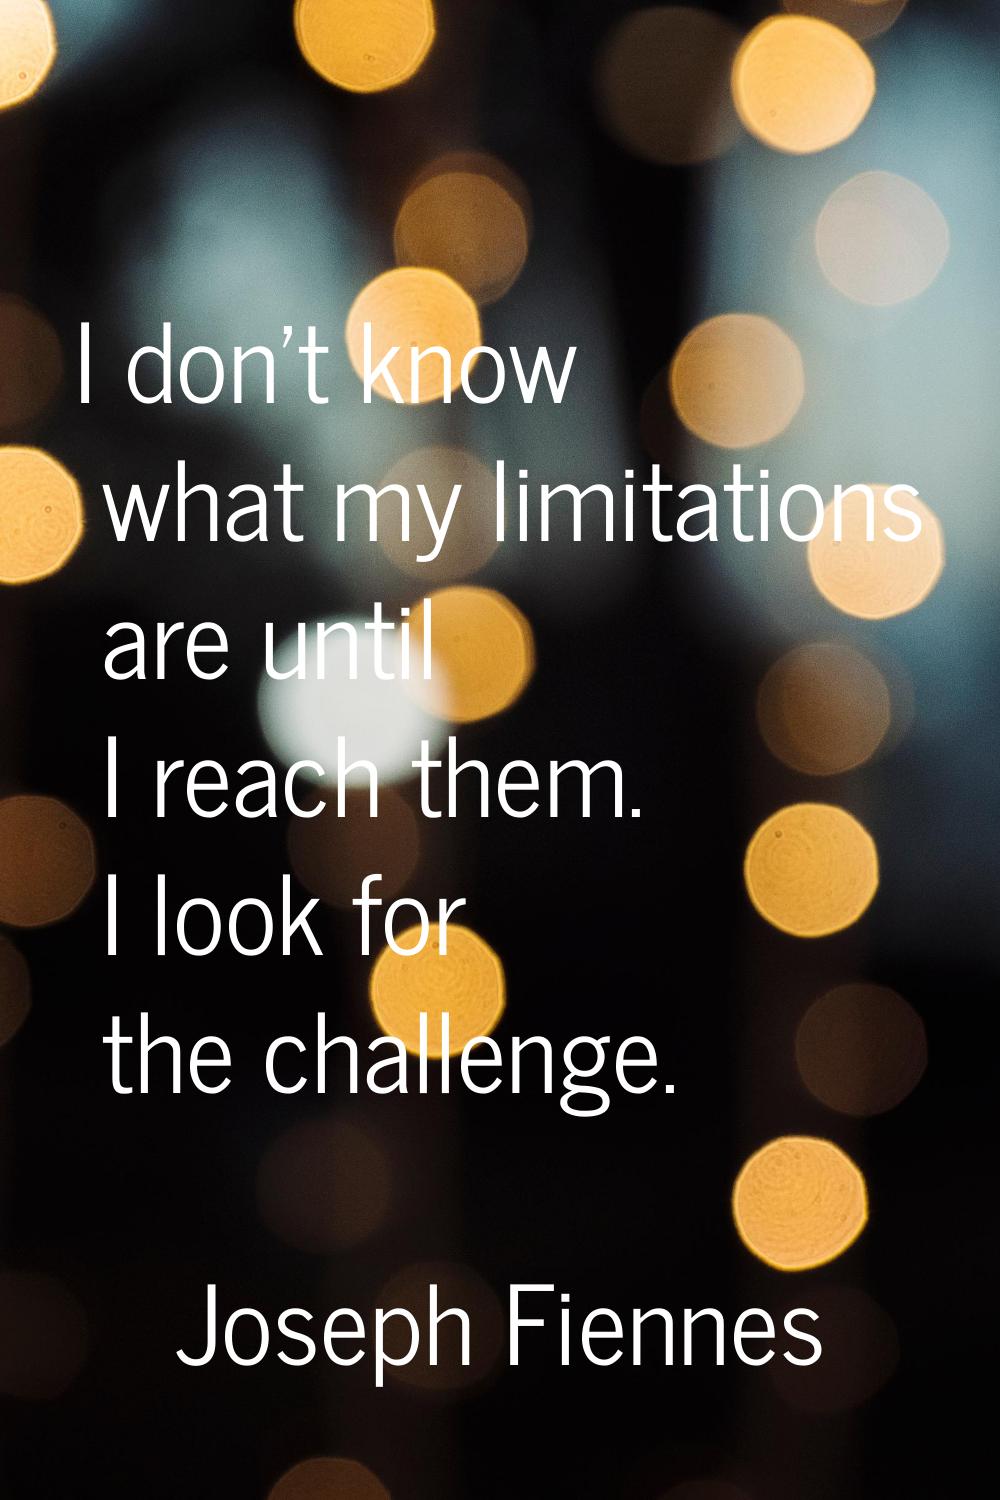 I don't know what my limitations are until I reach them. I look for the challenge.